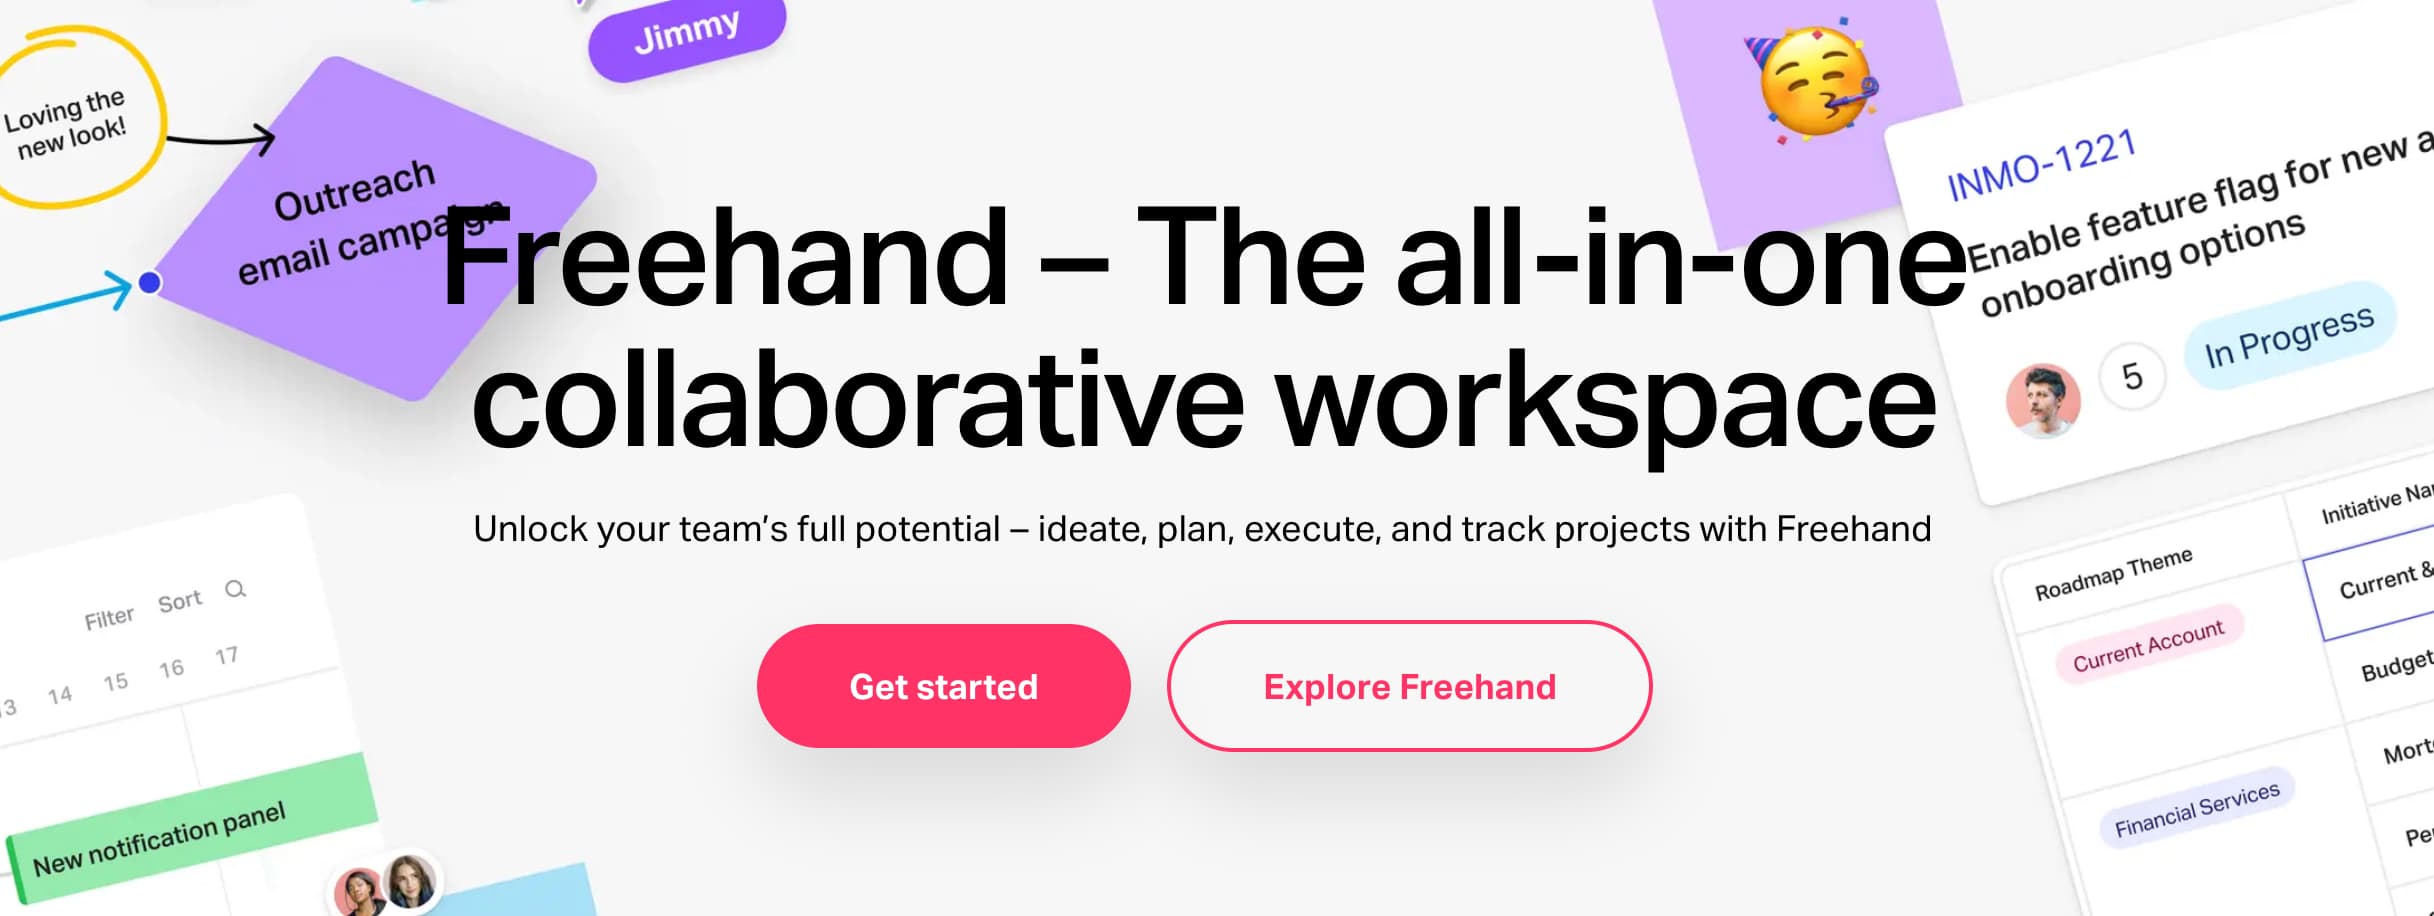 A screenshot of the Invision website